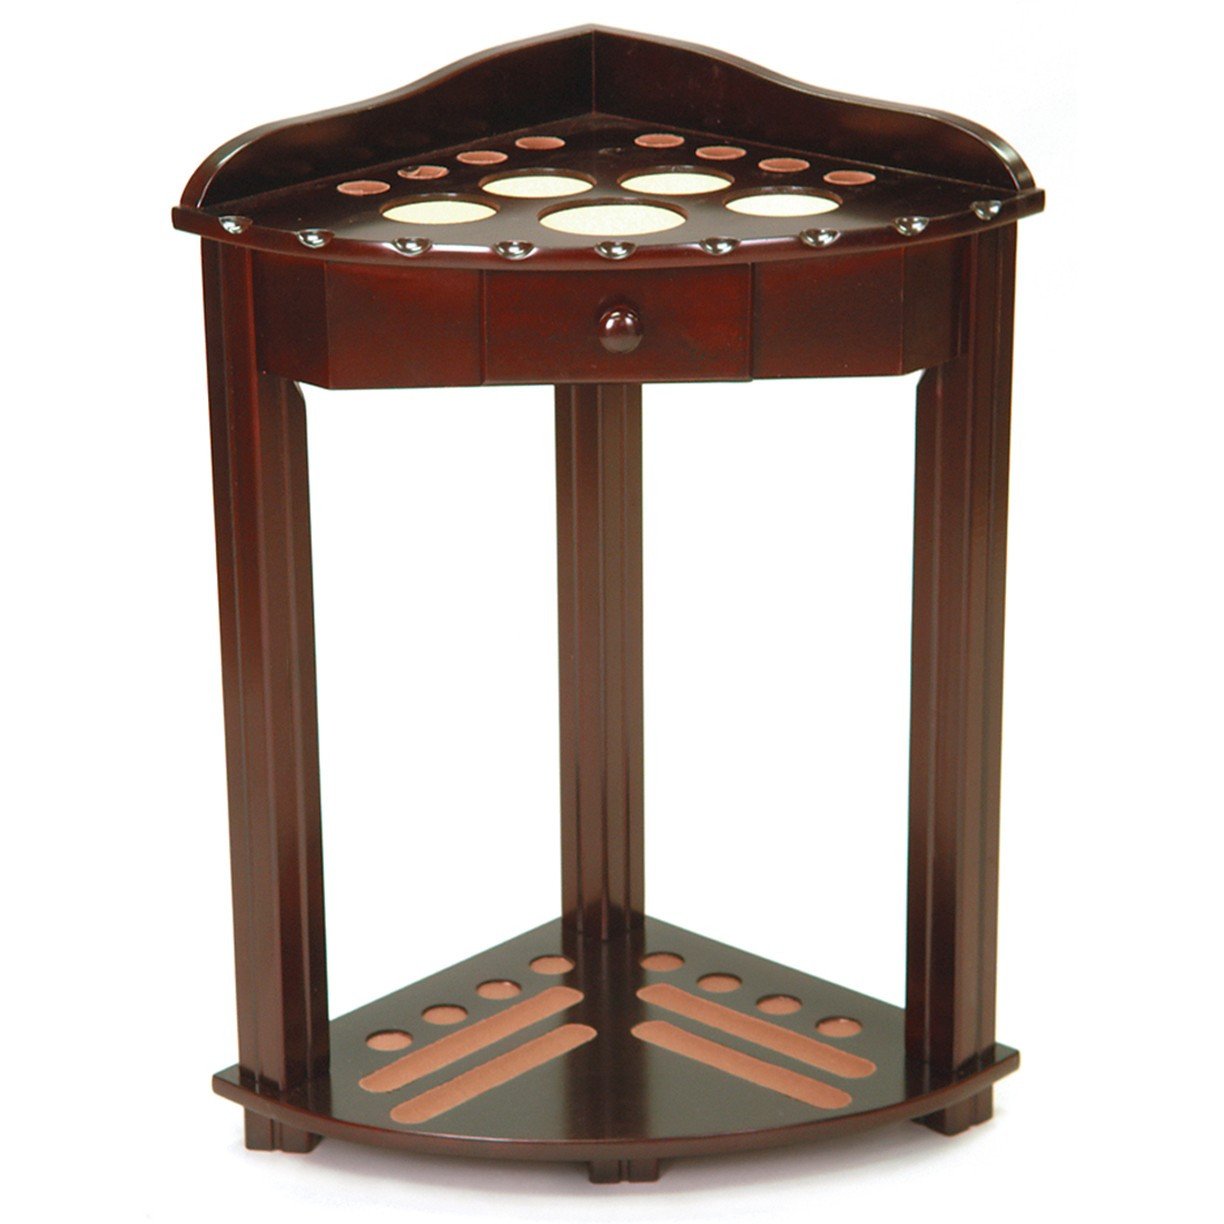 Imperial Deluxe Corner Cue Rack with Drawer in Mahogany